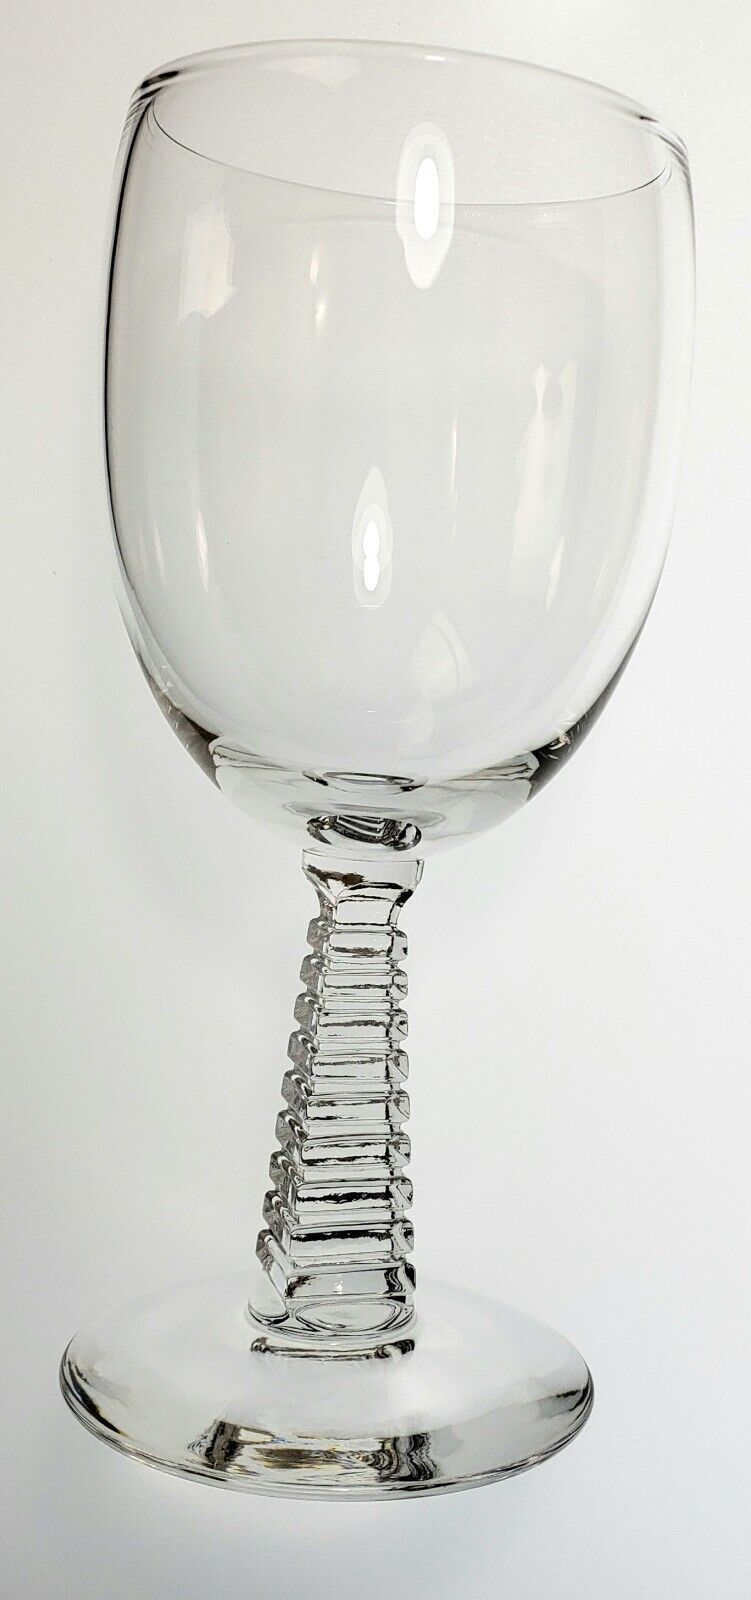 Bryce Bel Air Vintage Wine Stem 4-Sided Stacked Wafer Stem-Clear Non Optic Bowl